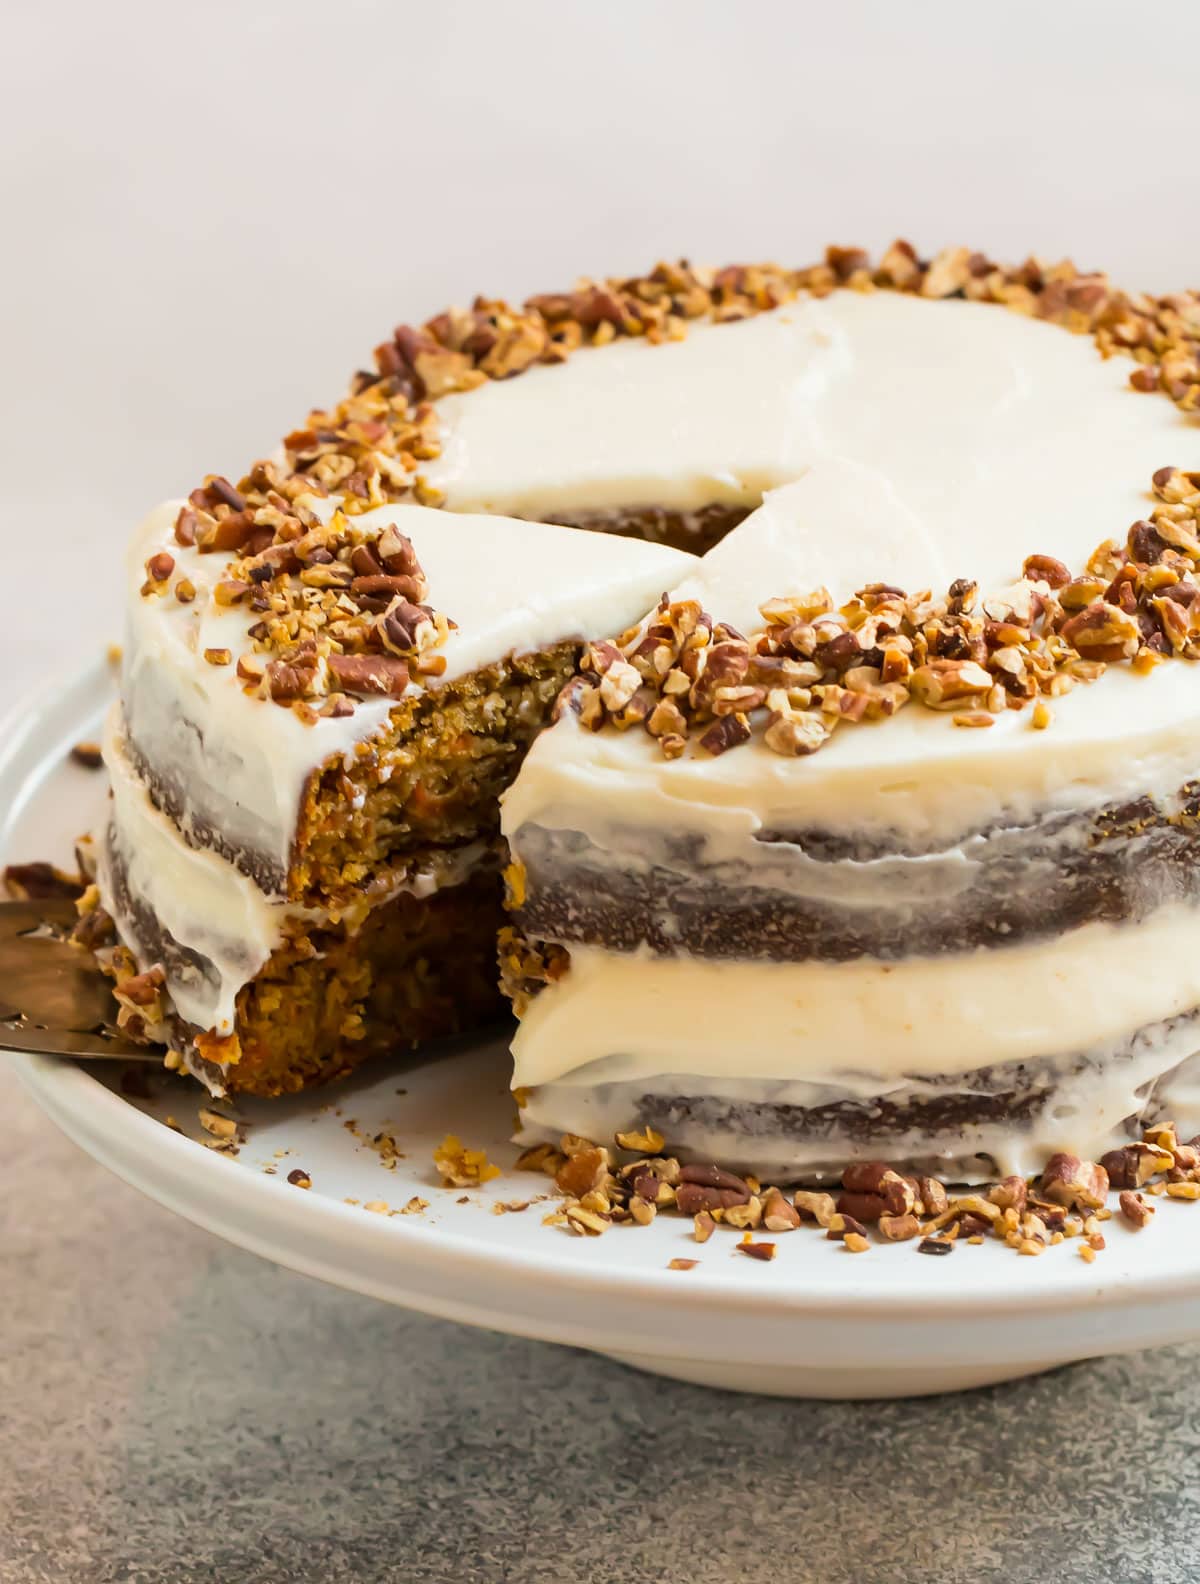 An almond flour gluten free carrot cake with cream cheese frosting and chopped nuts